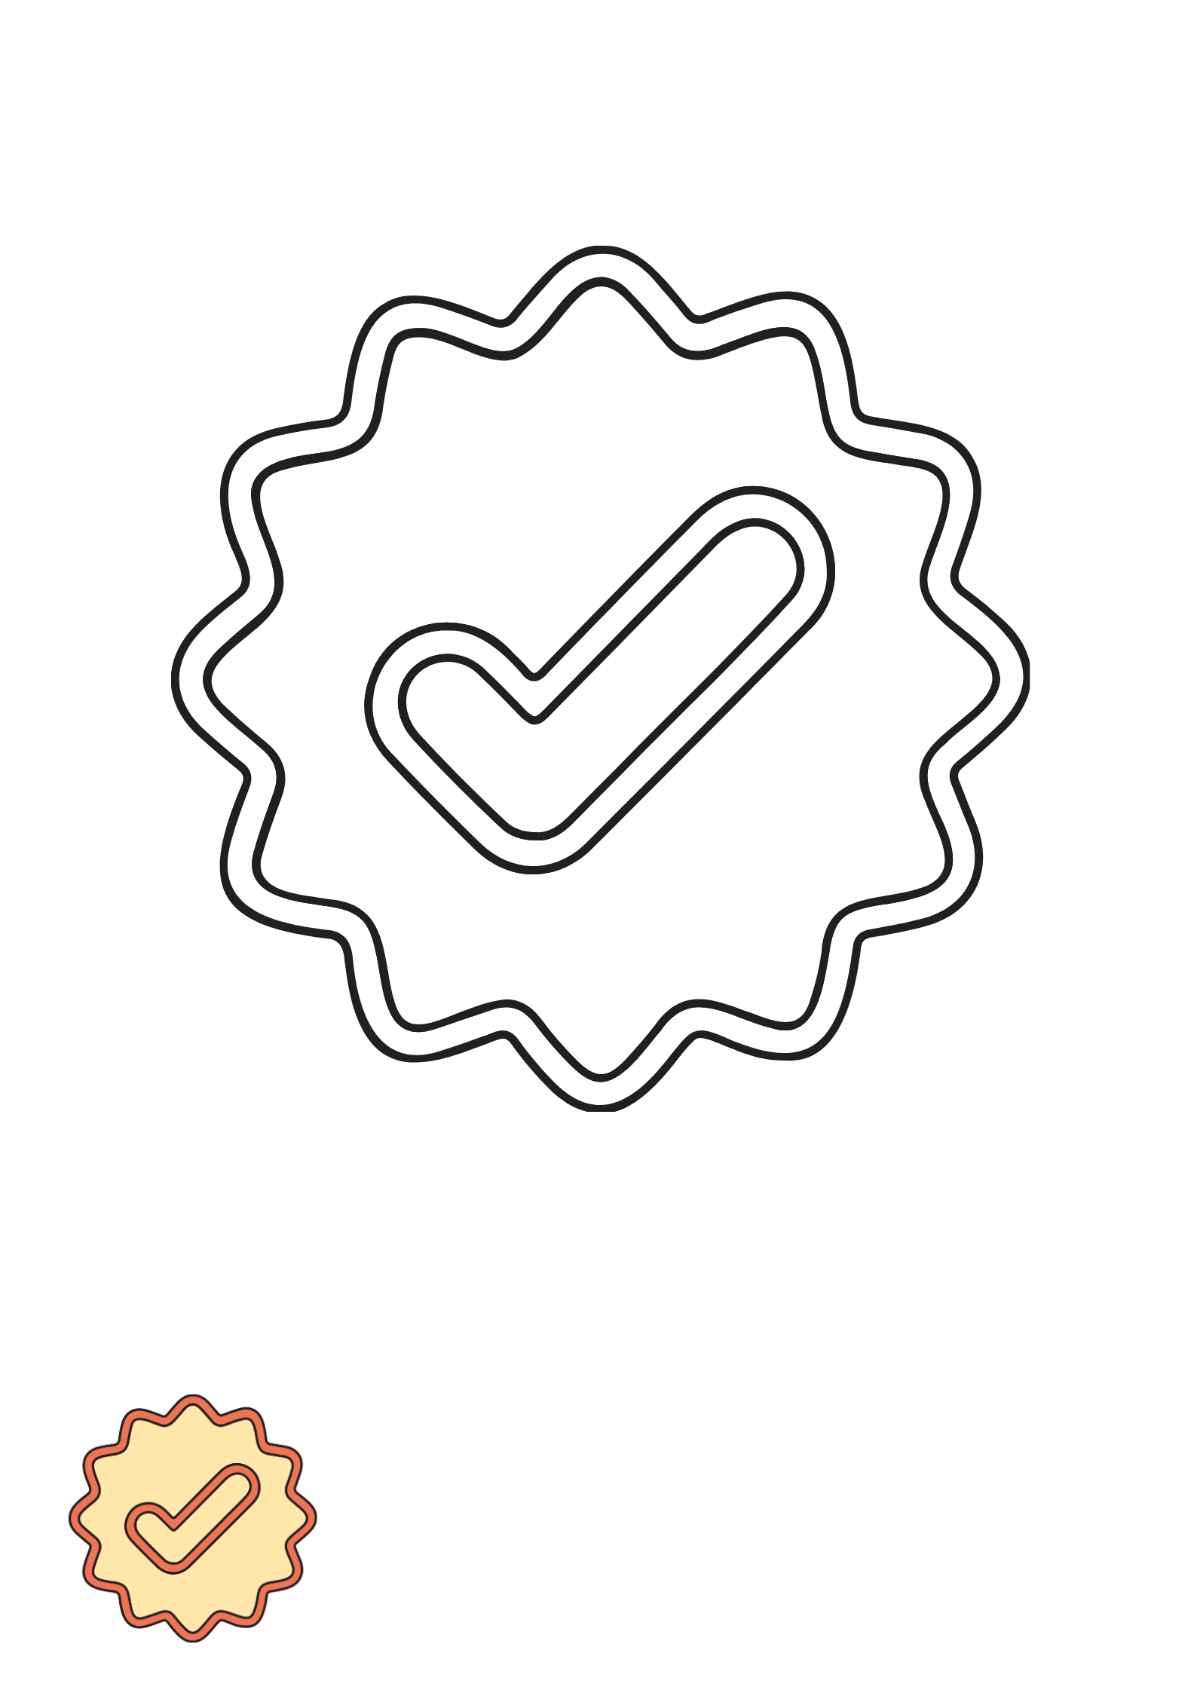 Check Mark Shape coloring page Template